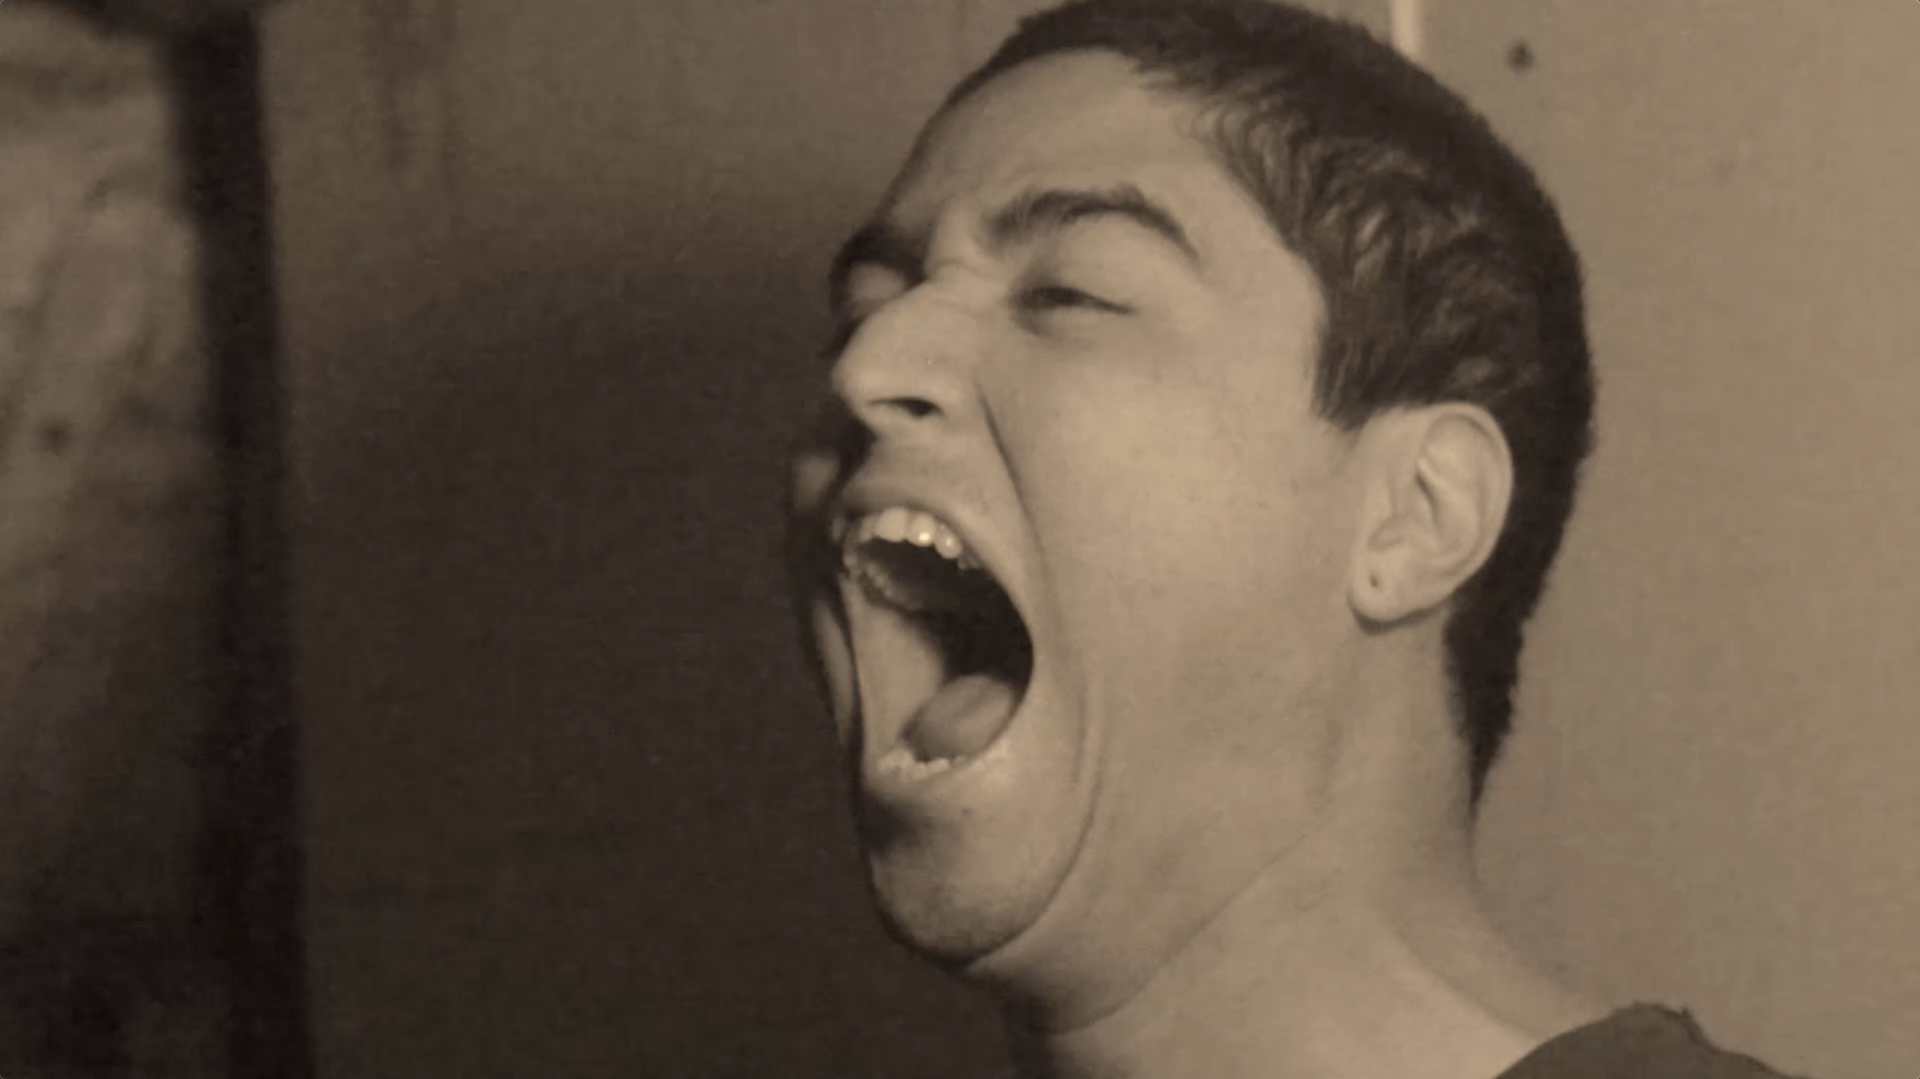 Screen capture of a digital short film which shows a sepia toned scene of the actor screaming